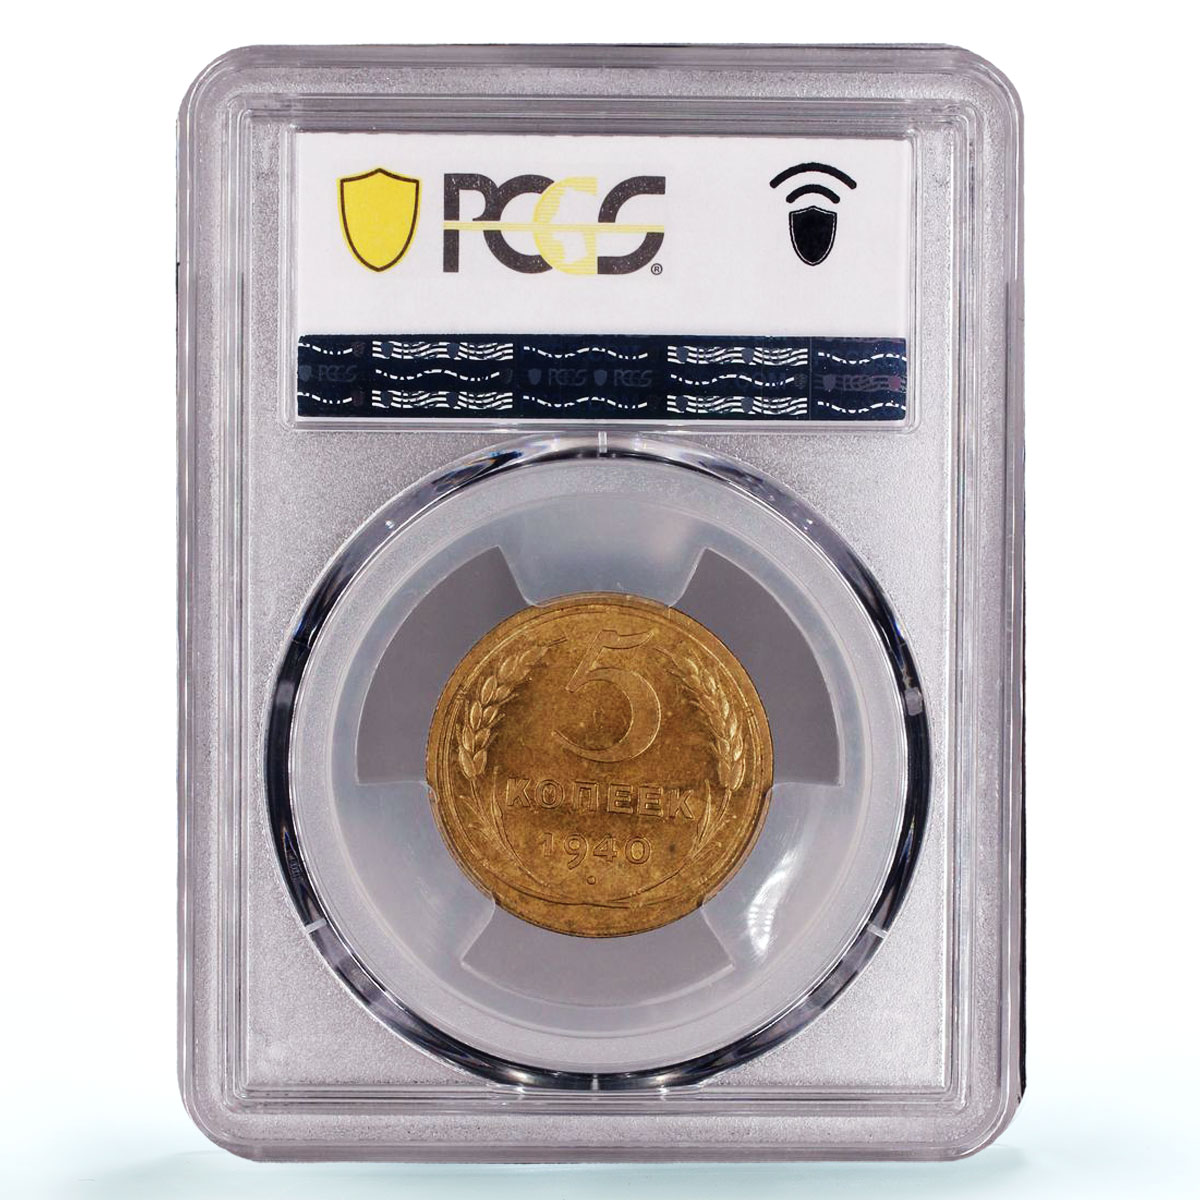 Russia USSR RSFSR 5 kopecks Regular Coinage Y-108 MS63 PCGS AlBronze coin 1940